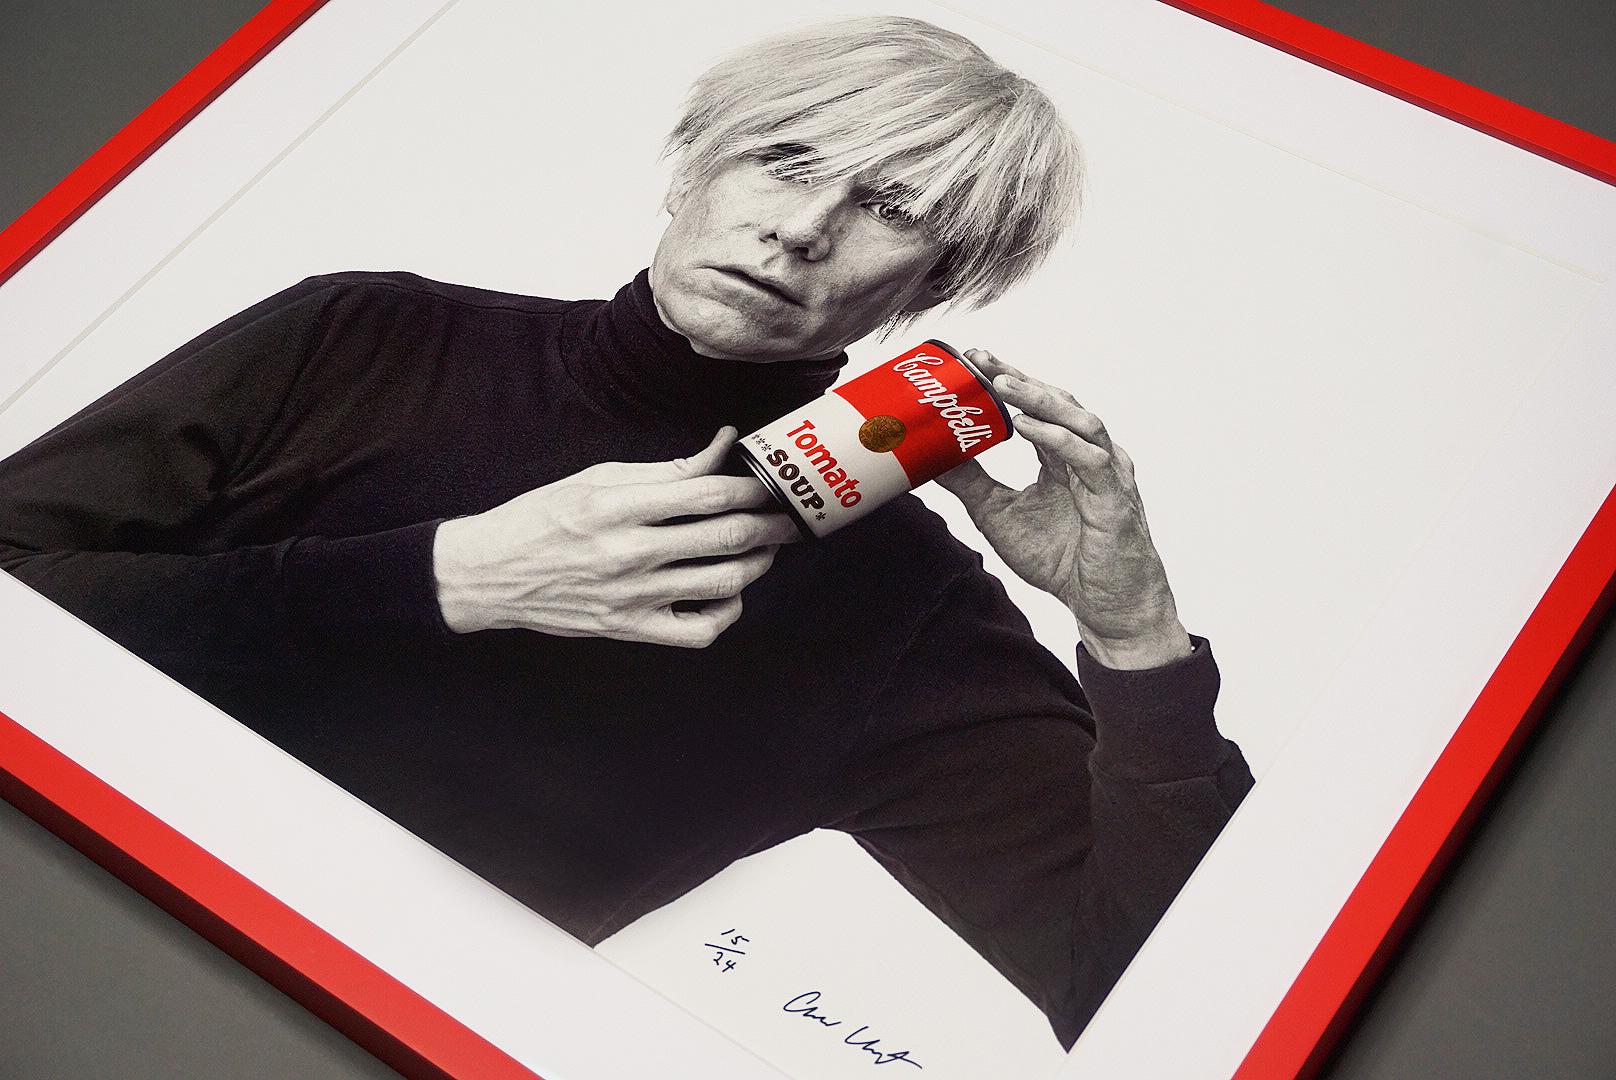 Andrew Unangst, Andy Warhol with Red Campbell's Soup Can, 1985/2017 5